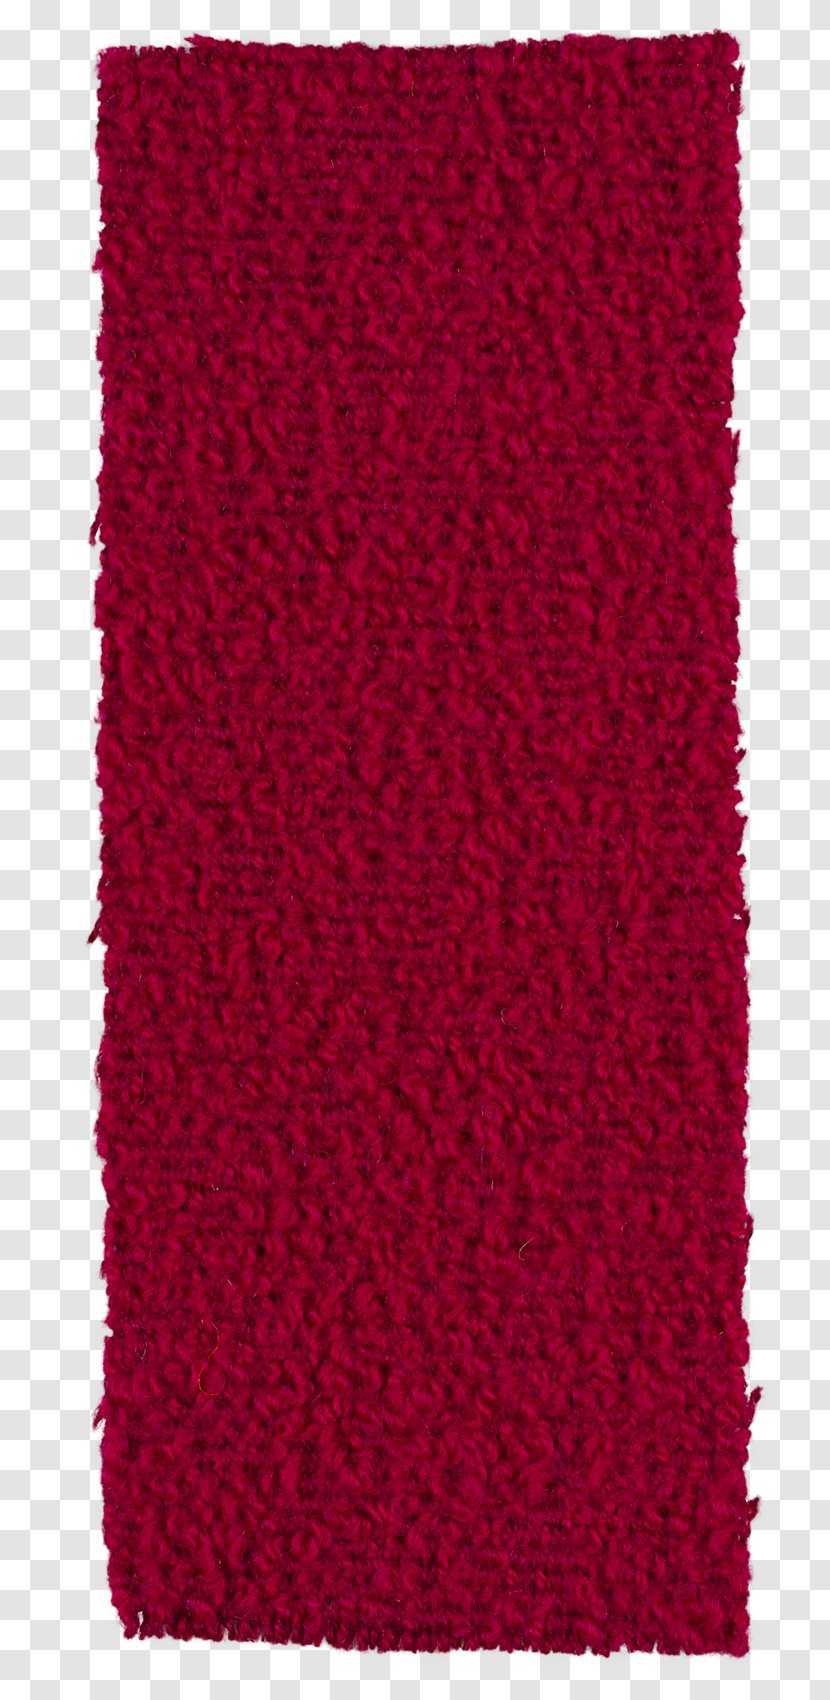 Rectangle Wool RED.M - Flax Fiber Yarn Transparent PNG